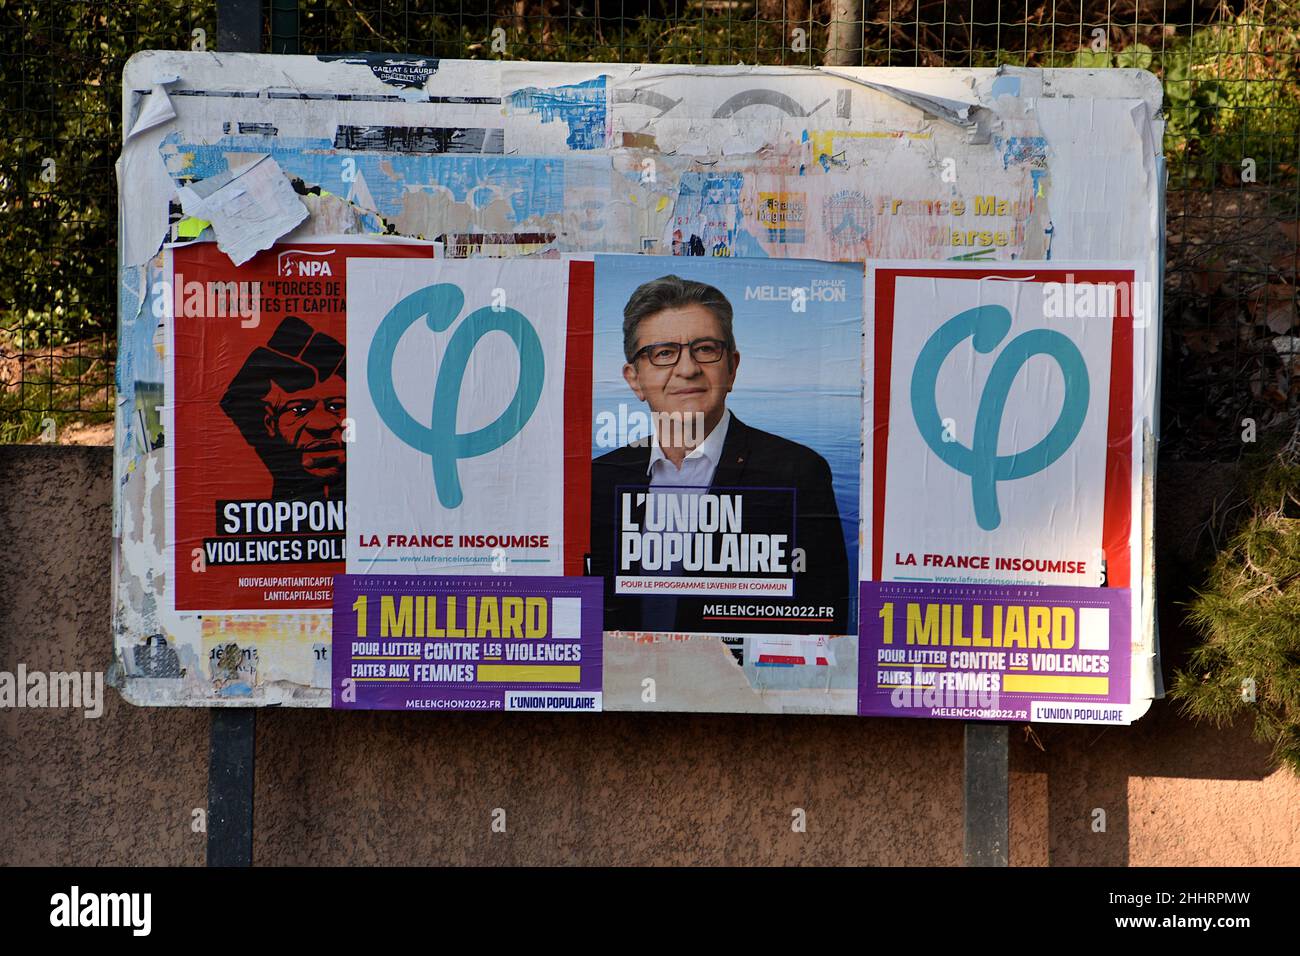 Marseille, France. 25th Jan, 2022. A poster of Jean-Luc Mélenchon is seen on display.Posters campaign of Nathalie Arthaud, Fabien Roussel, Philippe Poutou and Jean-Luc Mélenchon, candidates for the French presidential elections of 2022. (Photo by Gerard Bottino/SOPA Images/Sipa USA) Credit: Sipa USA/Alamy Live News Stock Photo